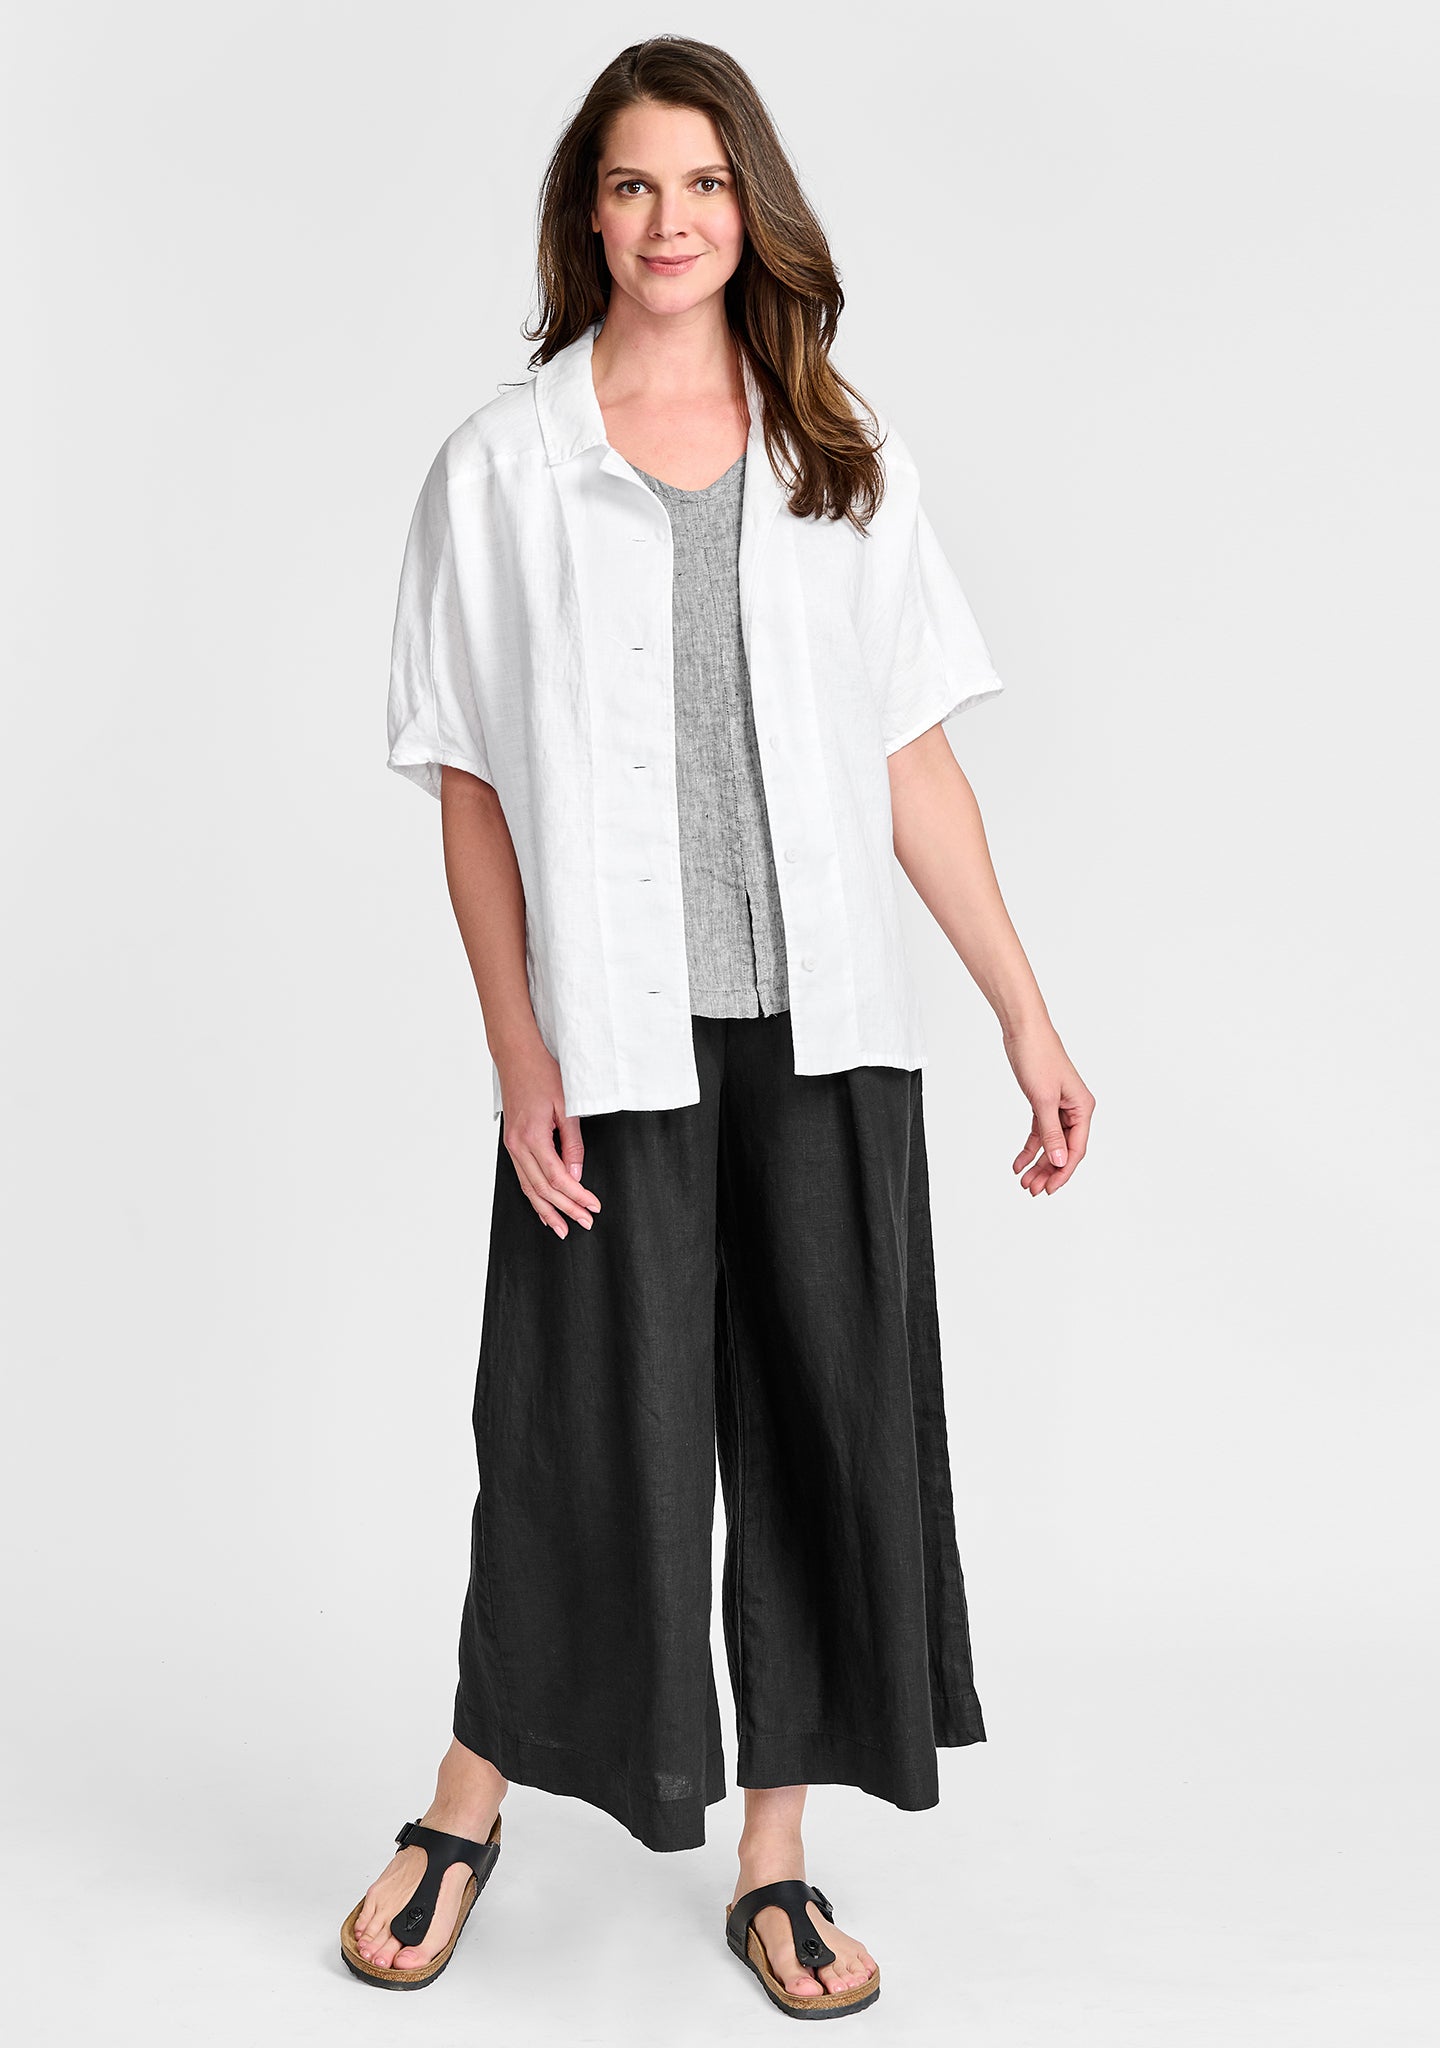 FLAX linen shirt in white with linen tank in grey and linen pants in black